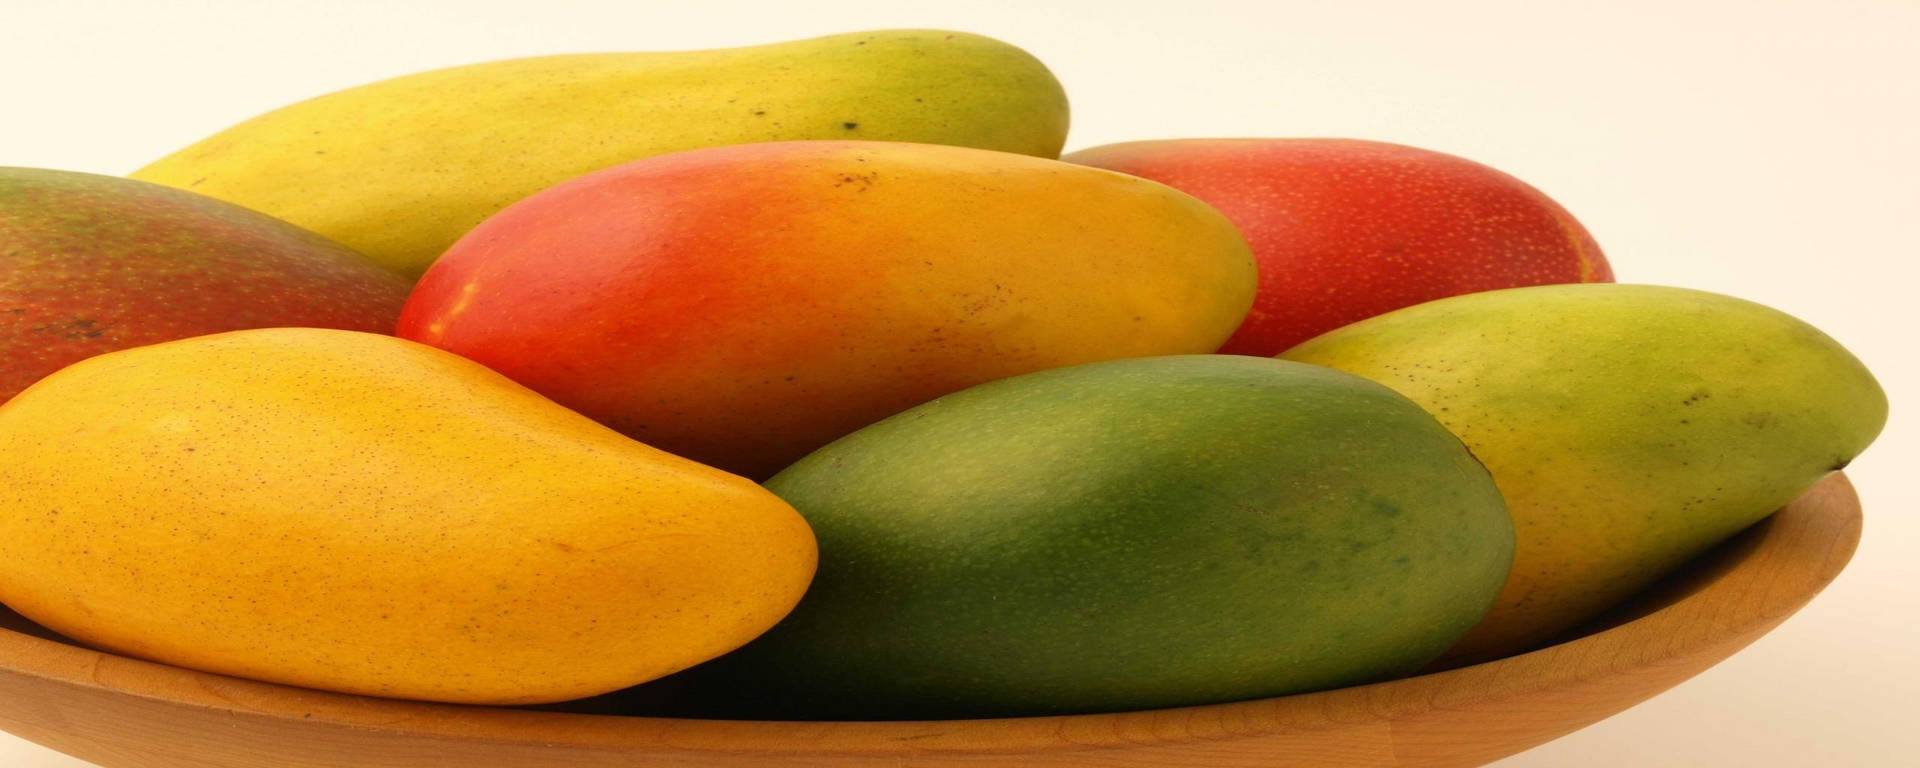 Different Colors Of Mango Fruits